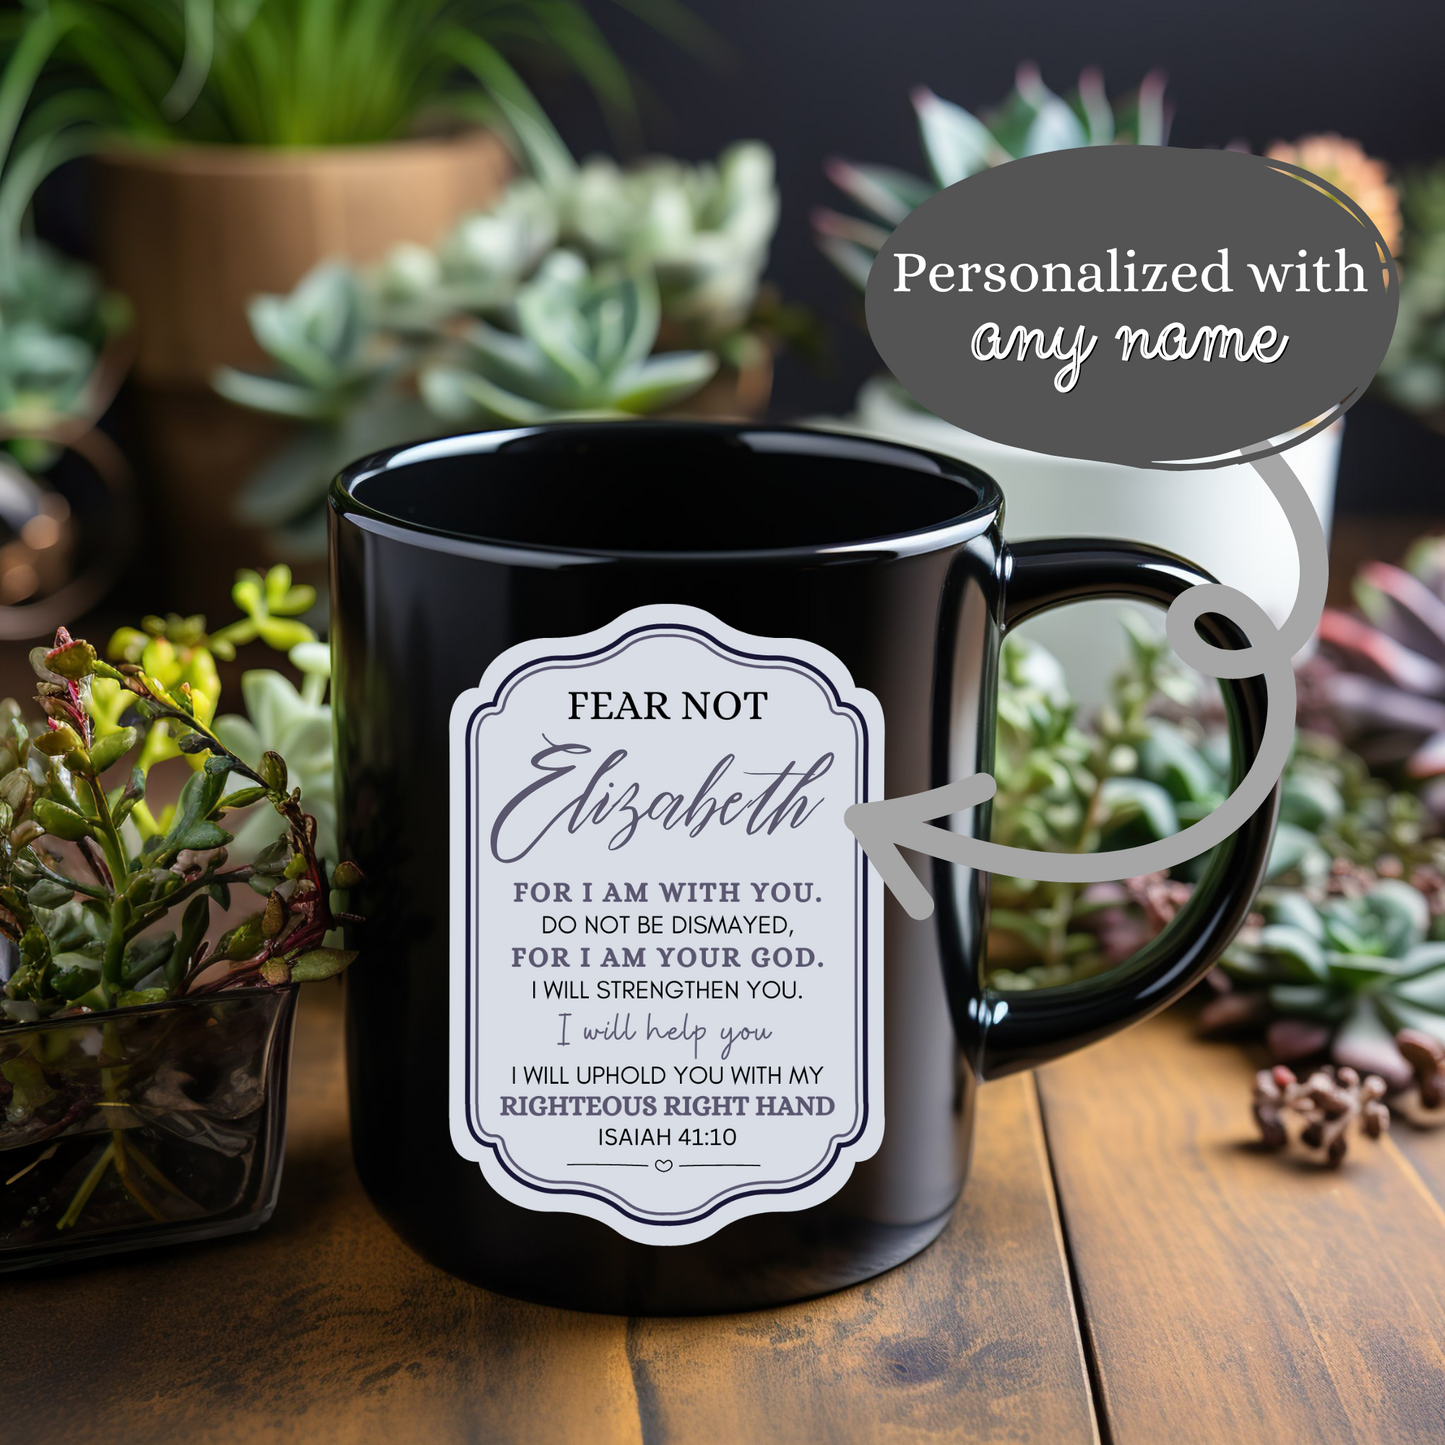 Personalized | Fear not for I am with you | Isaiah 41:10 | Ceramic Mug